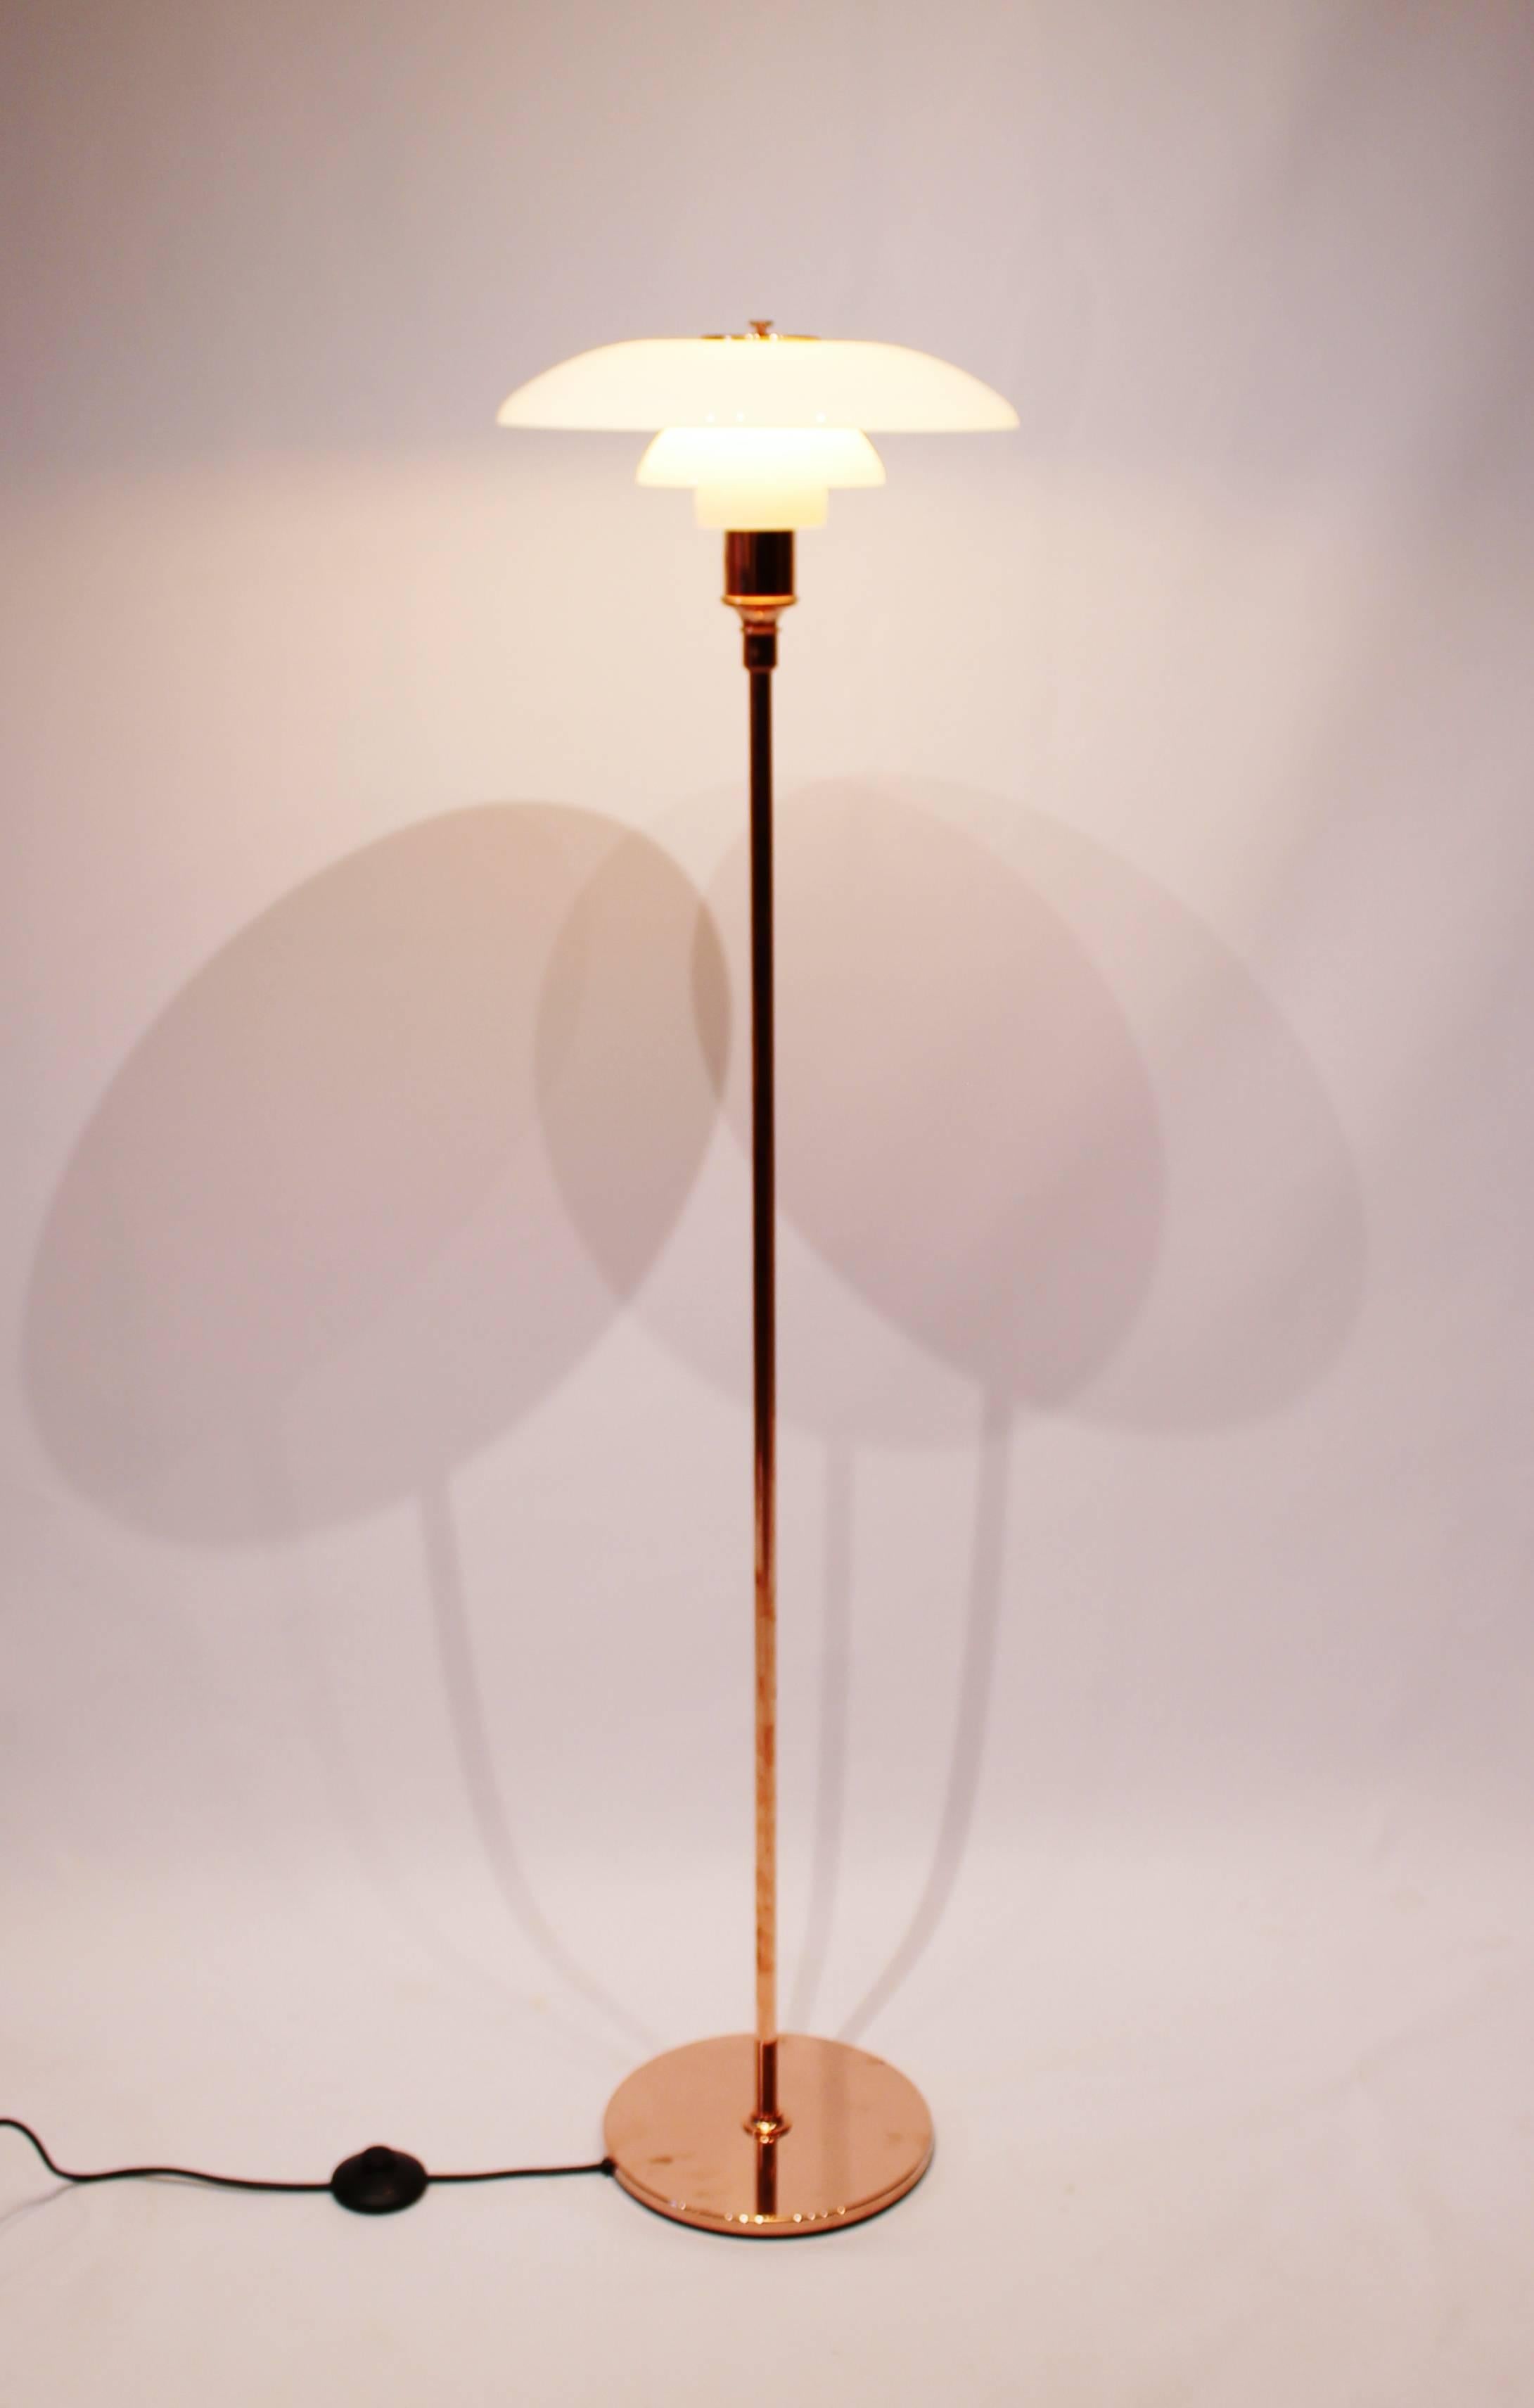 PH3½-2½, limited edition, copper floor lamp designed by Poul Henningsen and manufactured by Louis Poulsen. 

Louis Poulsen celebrated 90th anniversary of PH's pioneering three-shade system with launch of copper PH 3½-2½ Floor Lamp

PH 3½-2½ Copper